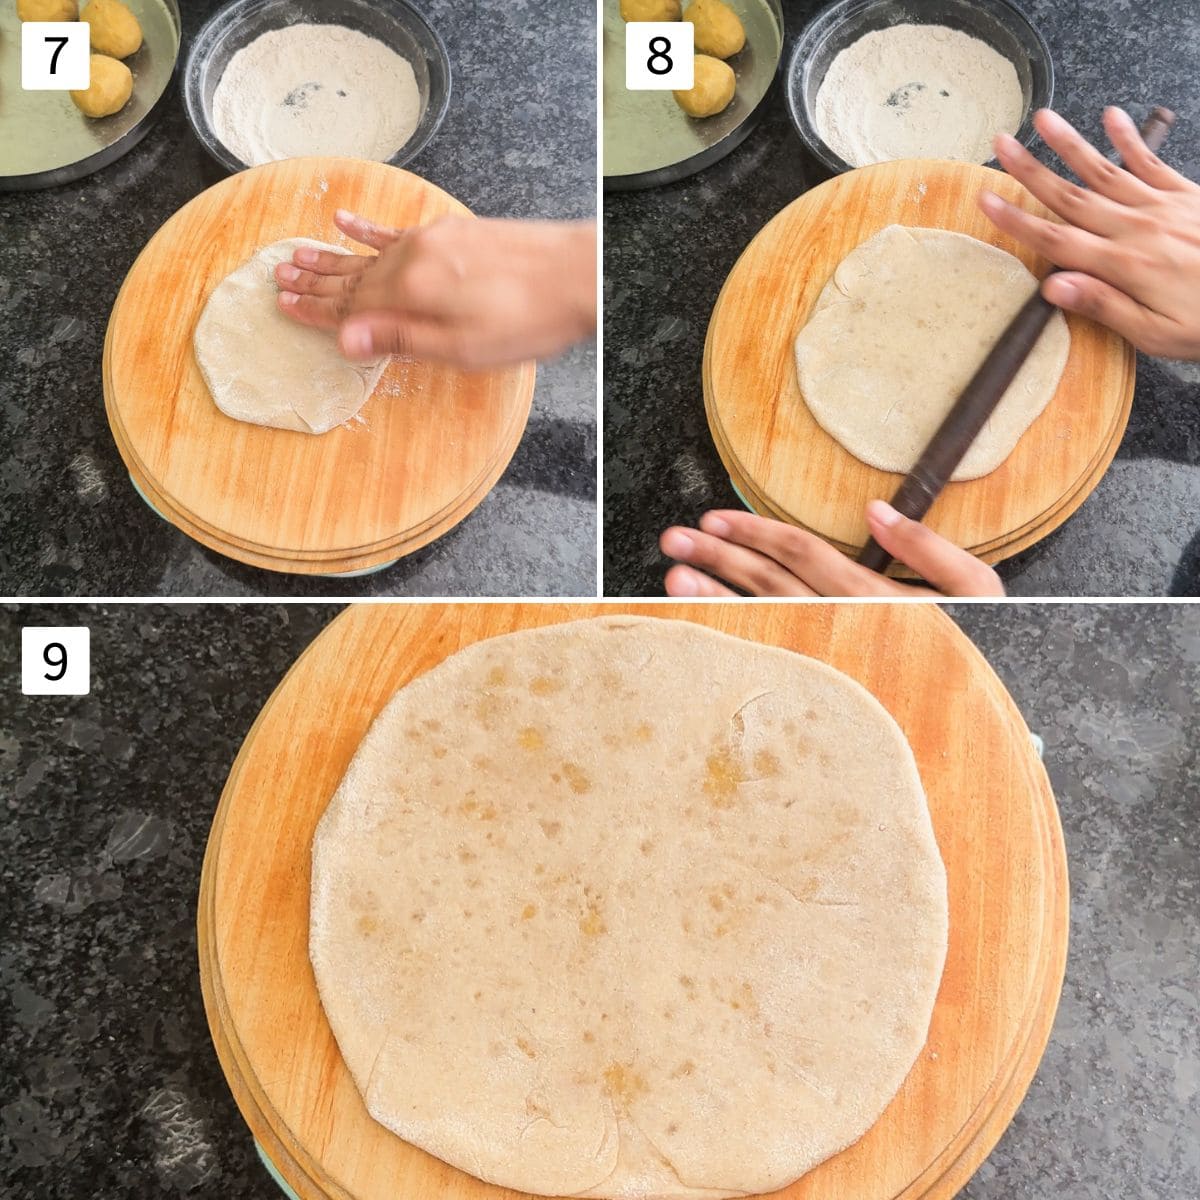 Collage of 3 images showing rolling stuffed dough.